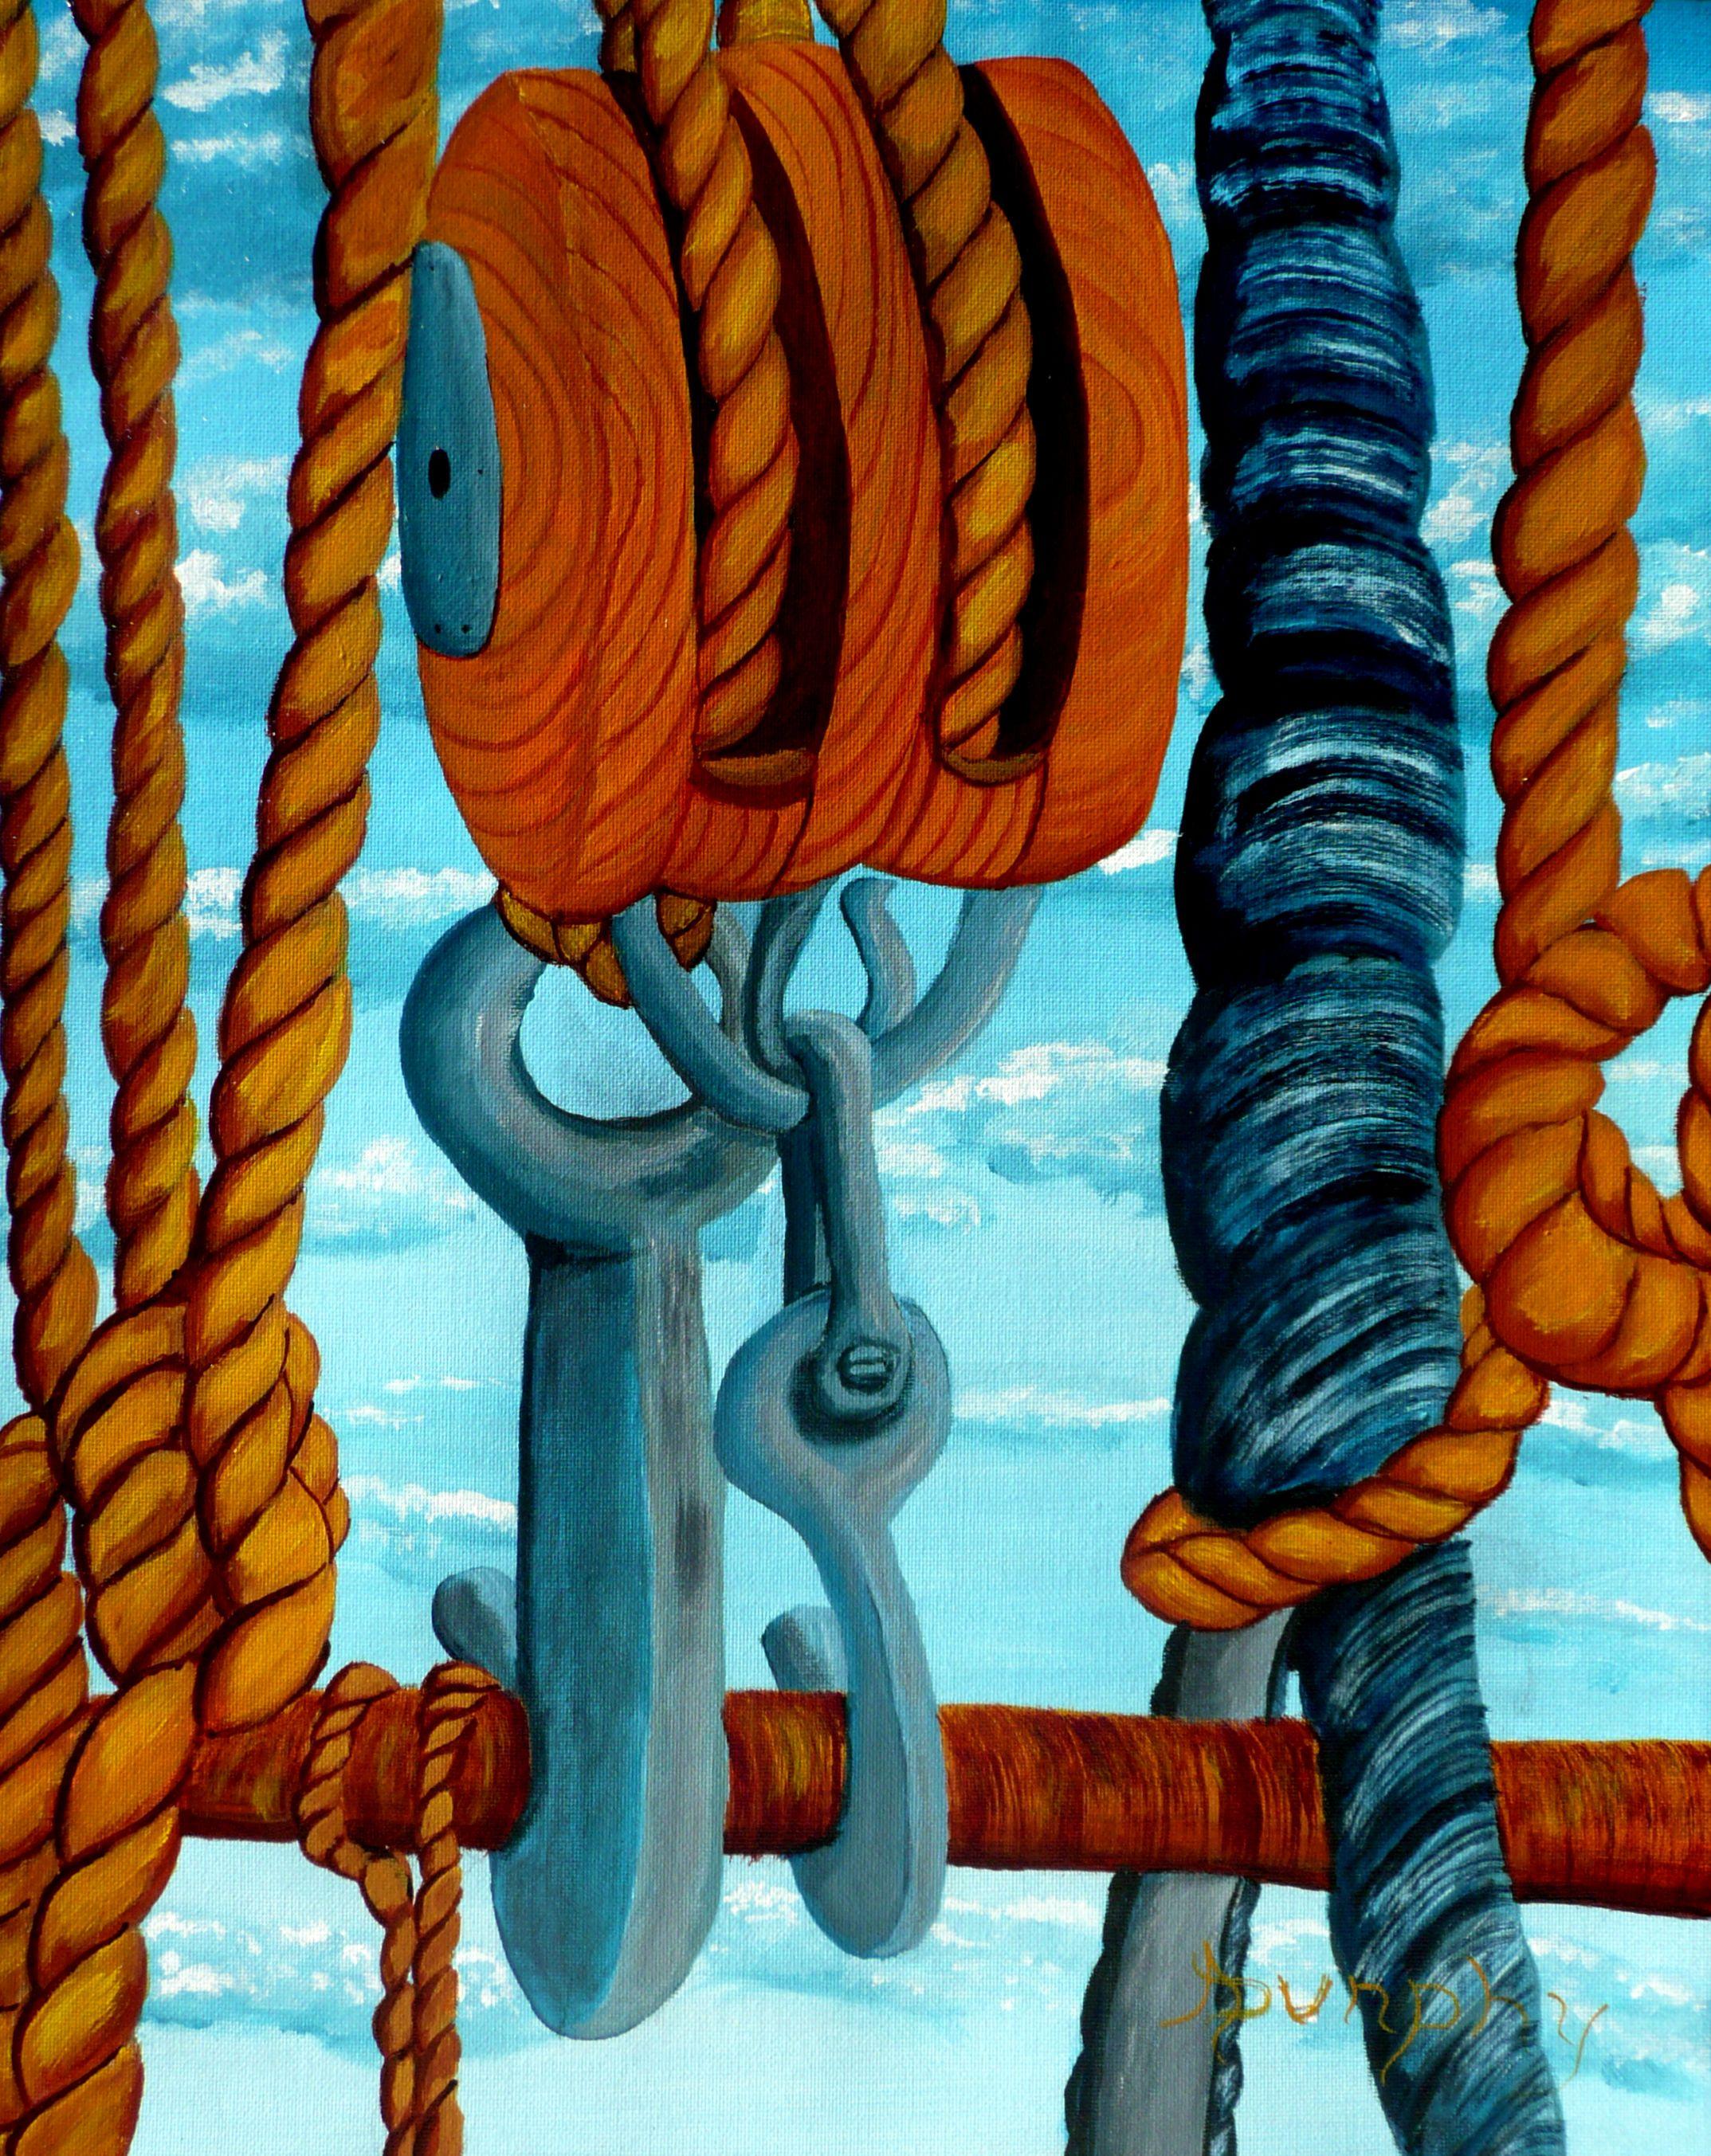 This painting depicts the running and standing rigging of a ship under sail. The creak of ropes as the strain comes upon them are the music of the ship at sea. This painting has been created using professional grade acrylics on unstretched canvas